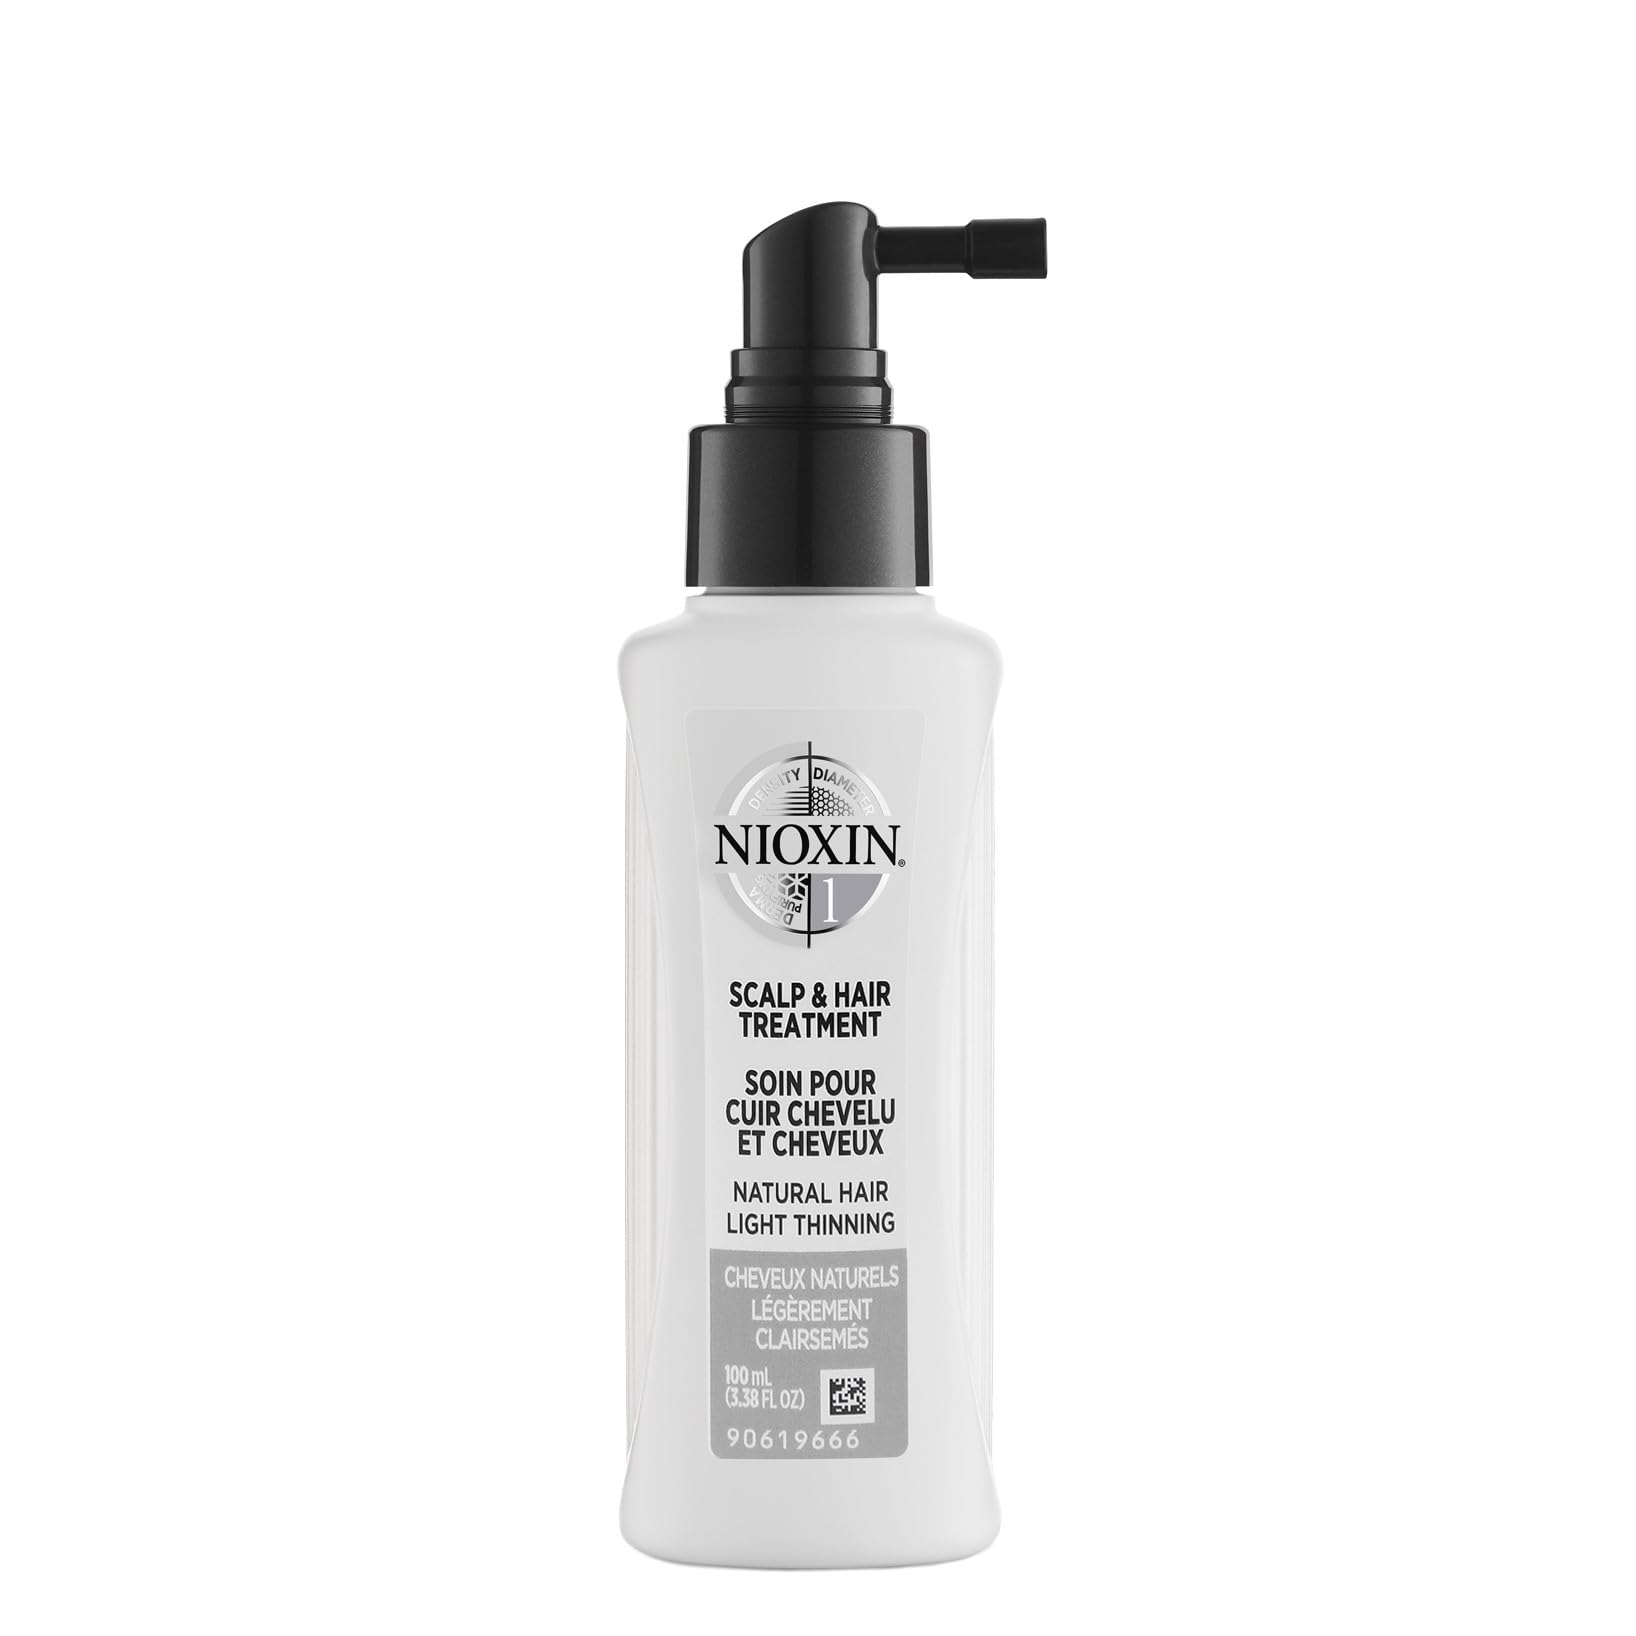 Nioxin System 1 Scalp & Hair Leave-In Treatment, Restore Hair Fullness, Prevent & Relieve Dry Scalp Symptoms, For Natural Hair with Light Thinning, 3.4 oz